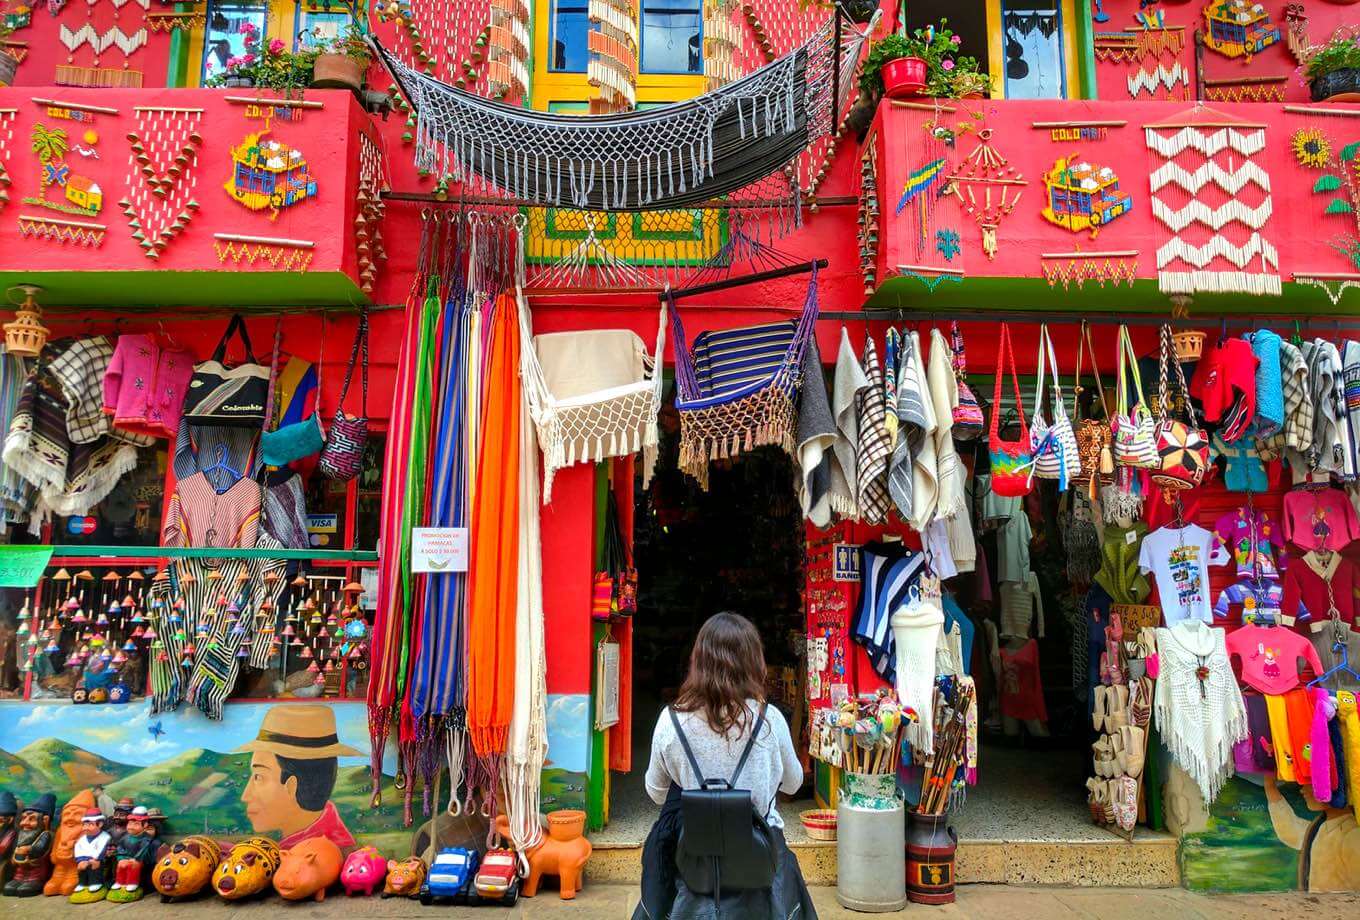 A shop selling traditional bags and masks